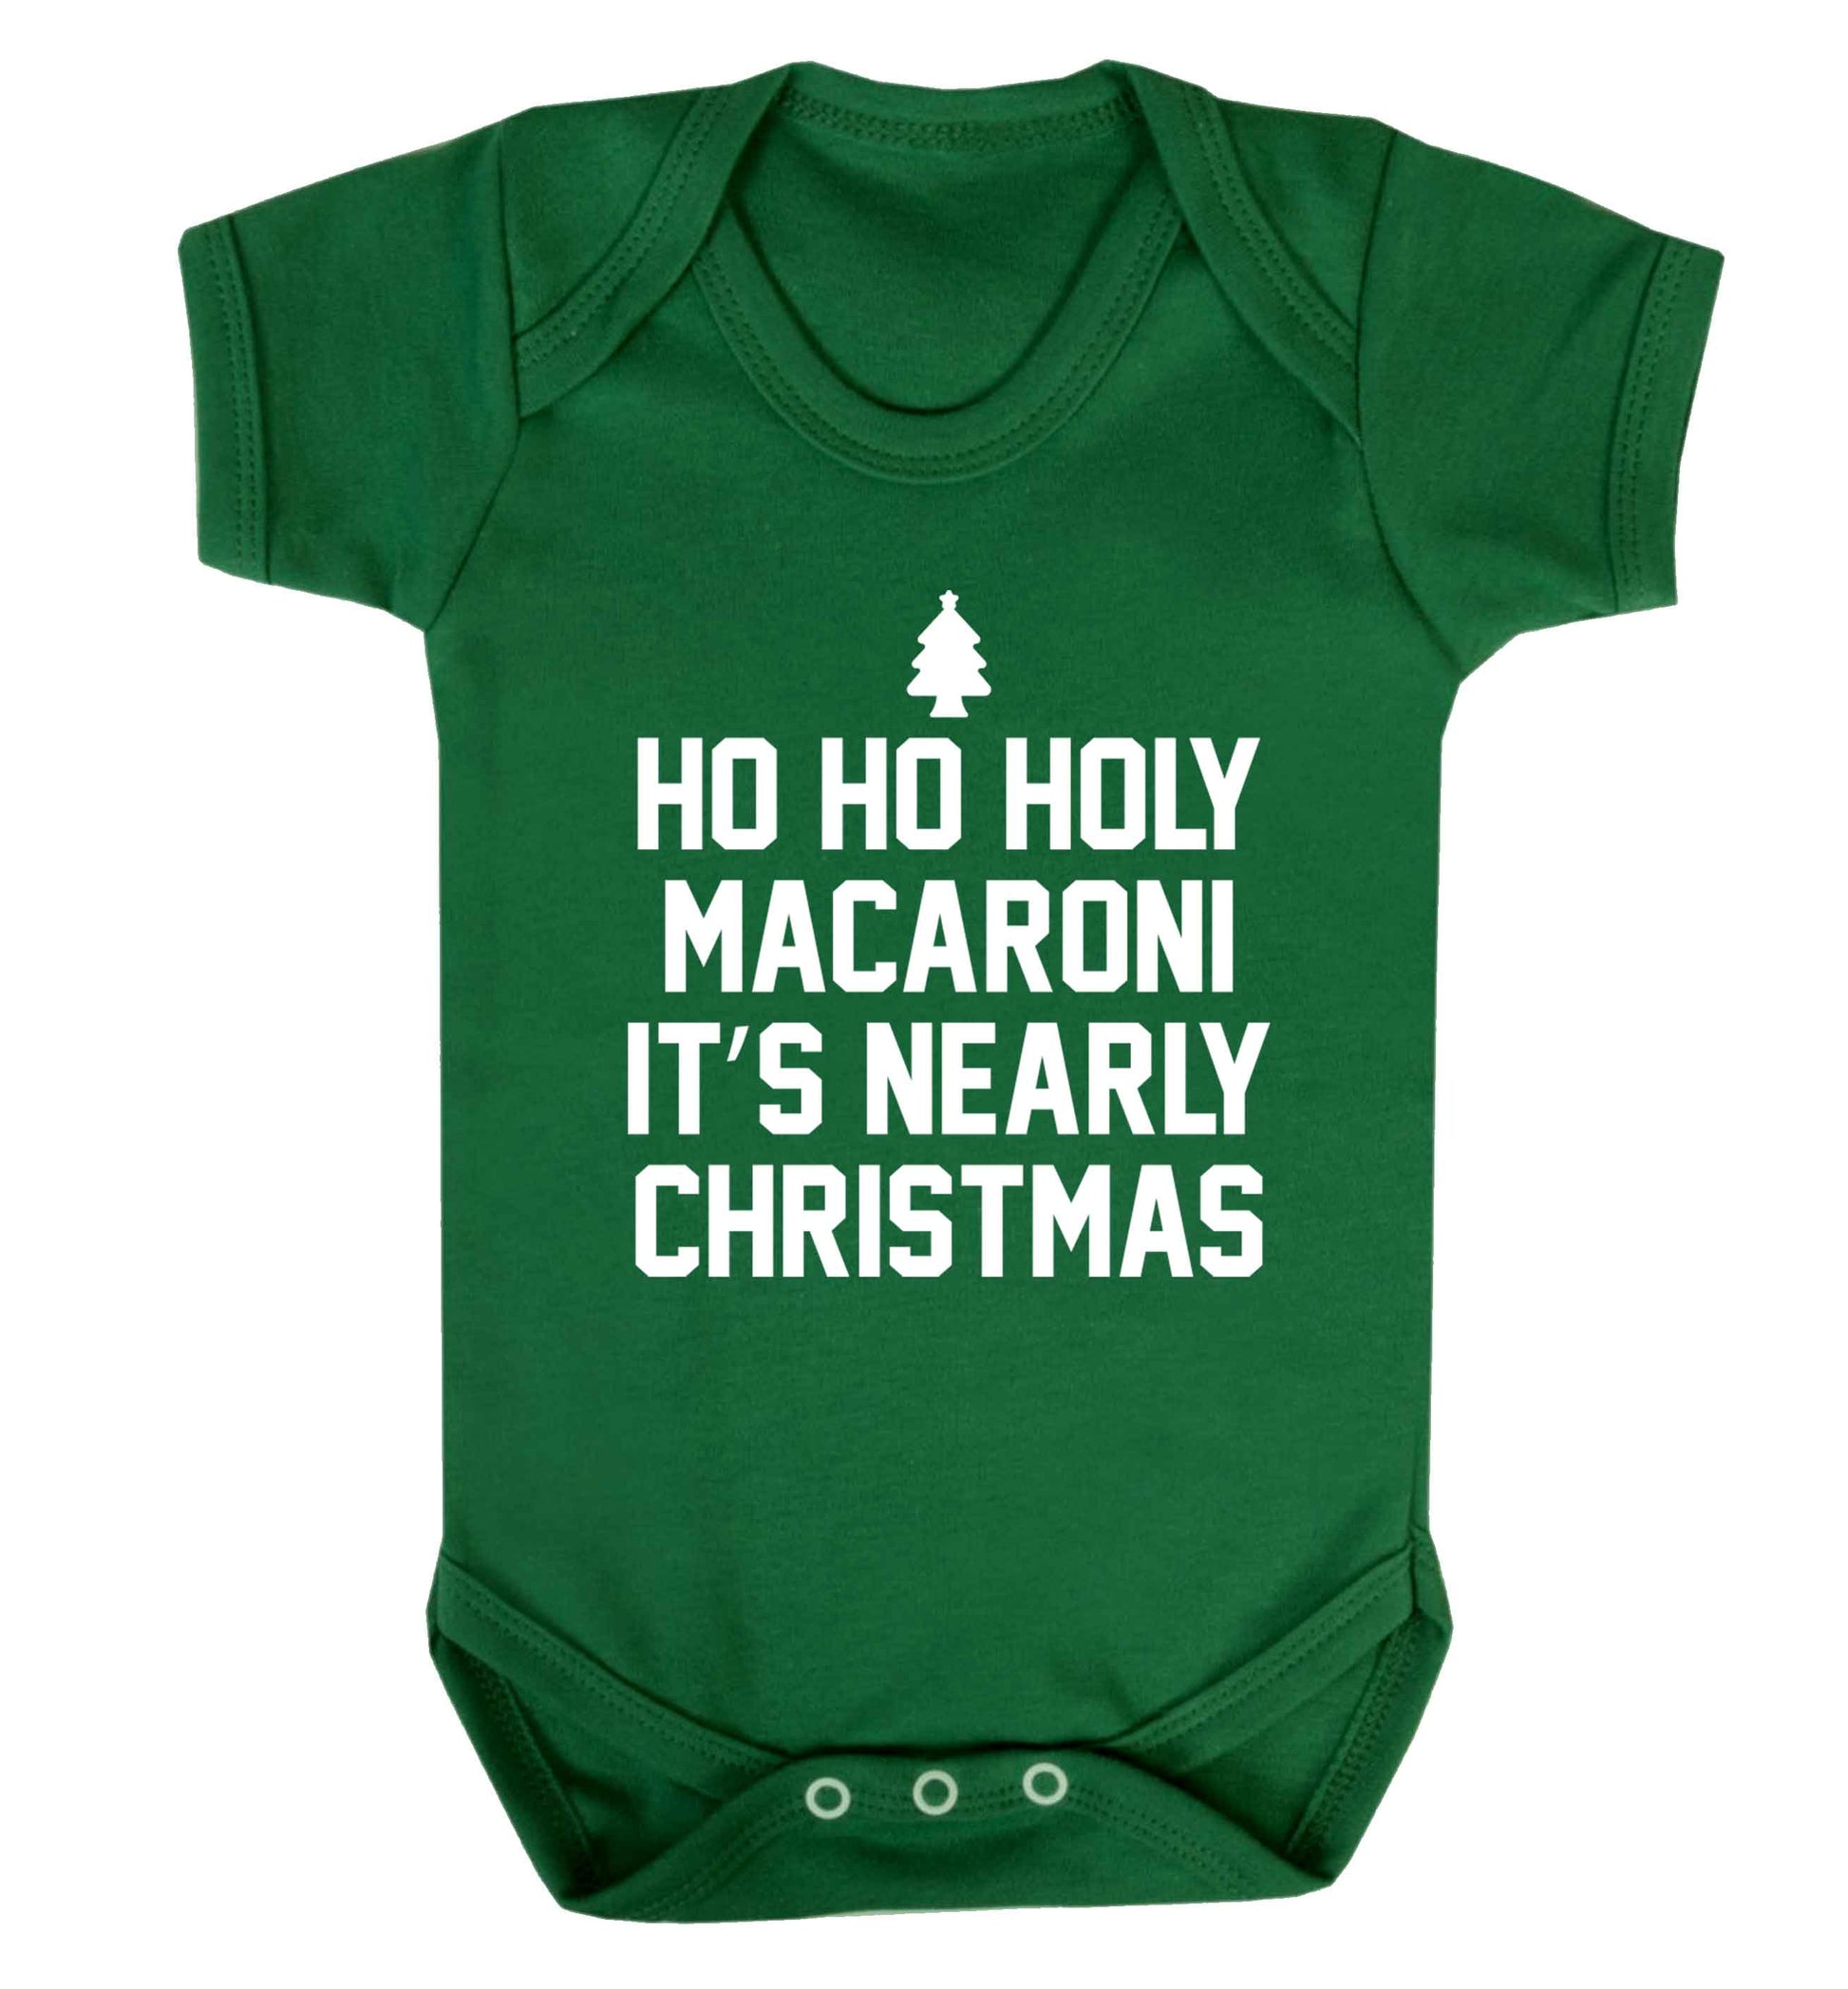 Ho ho holy macaroni it's nearly Christmas Baby Vest green 18-24 months